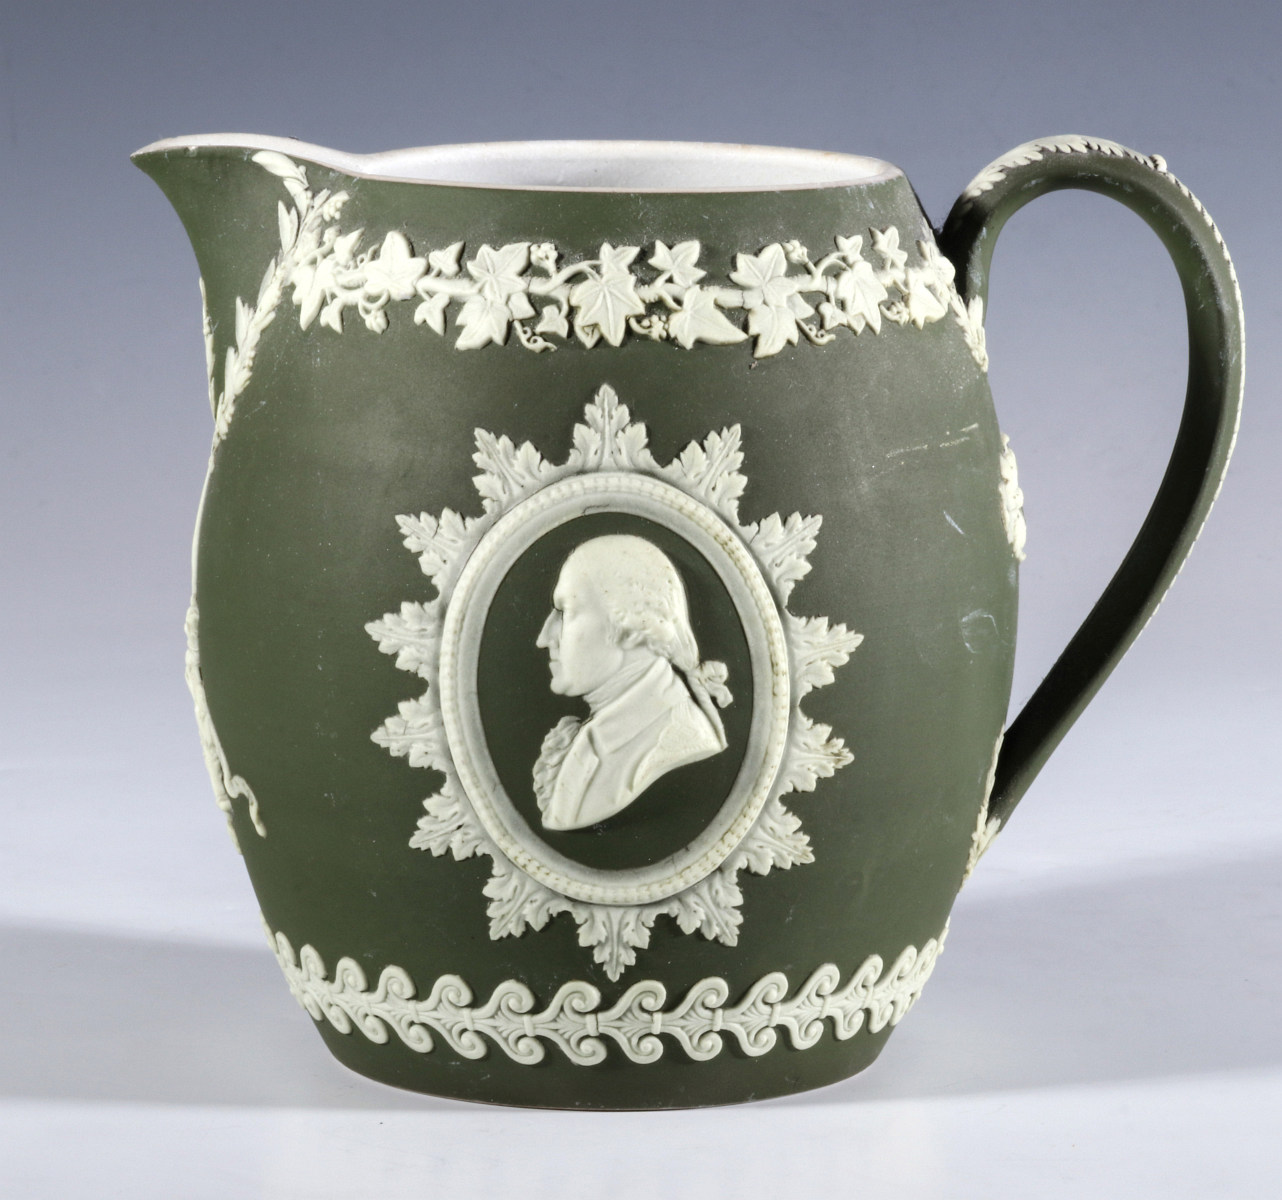 A WEDGWOOD PITCHER WITH WASHINGTON AND FRANKLIN